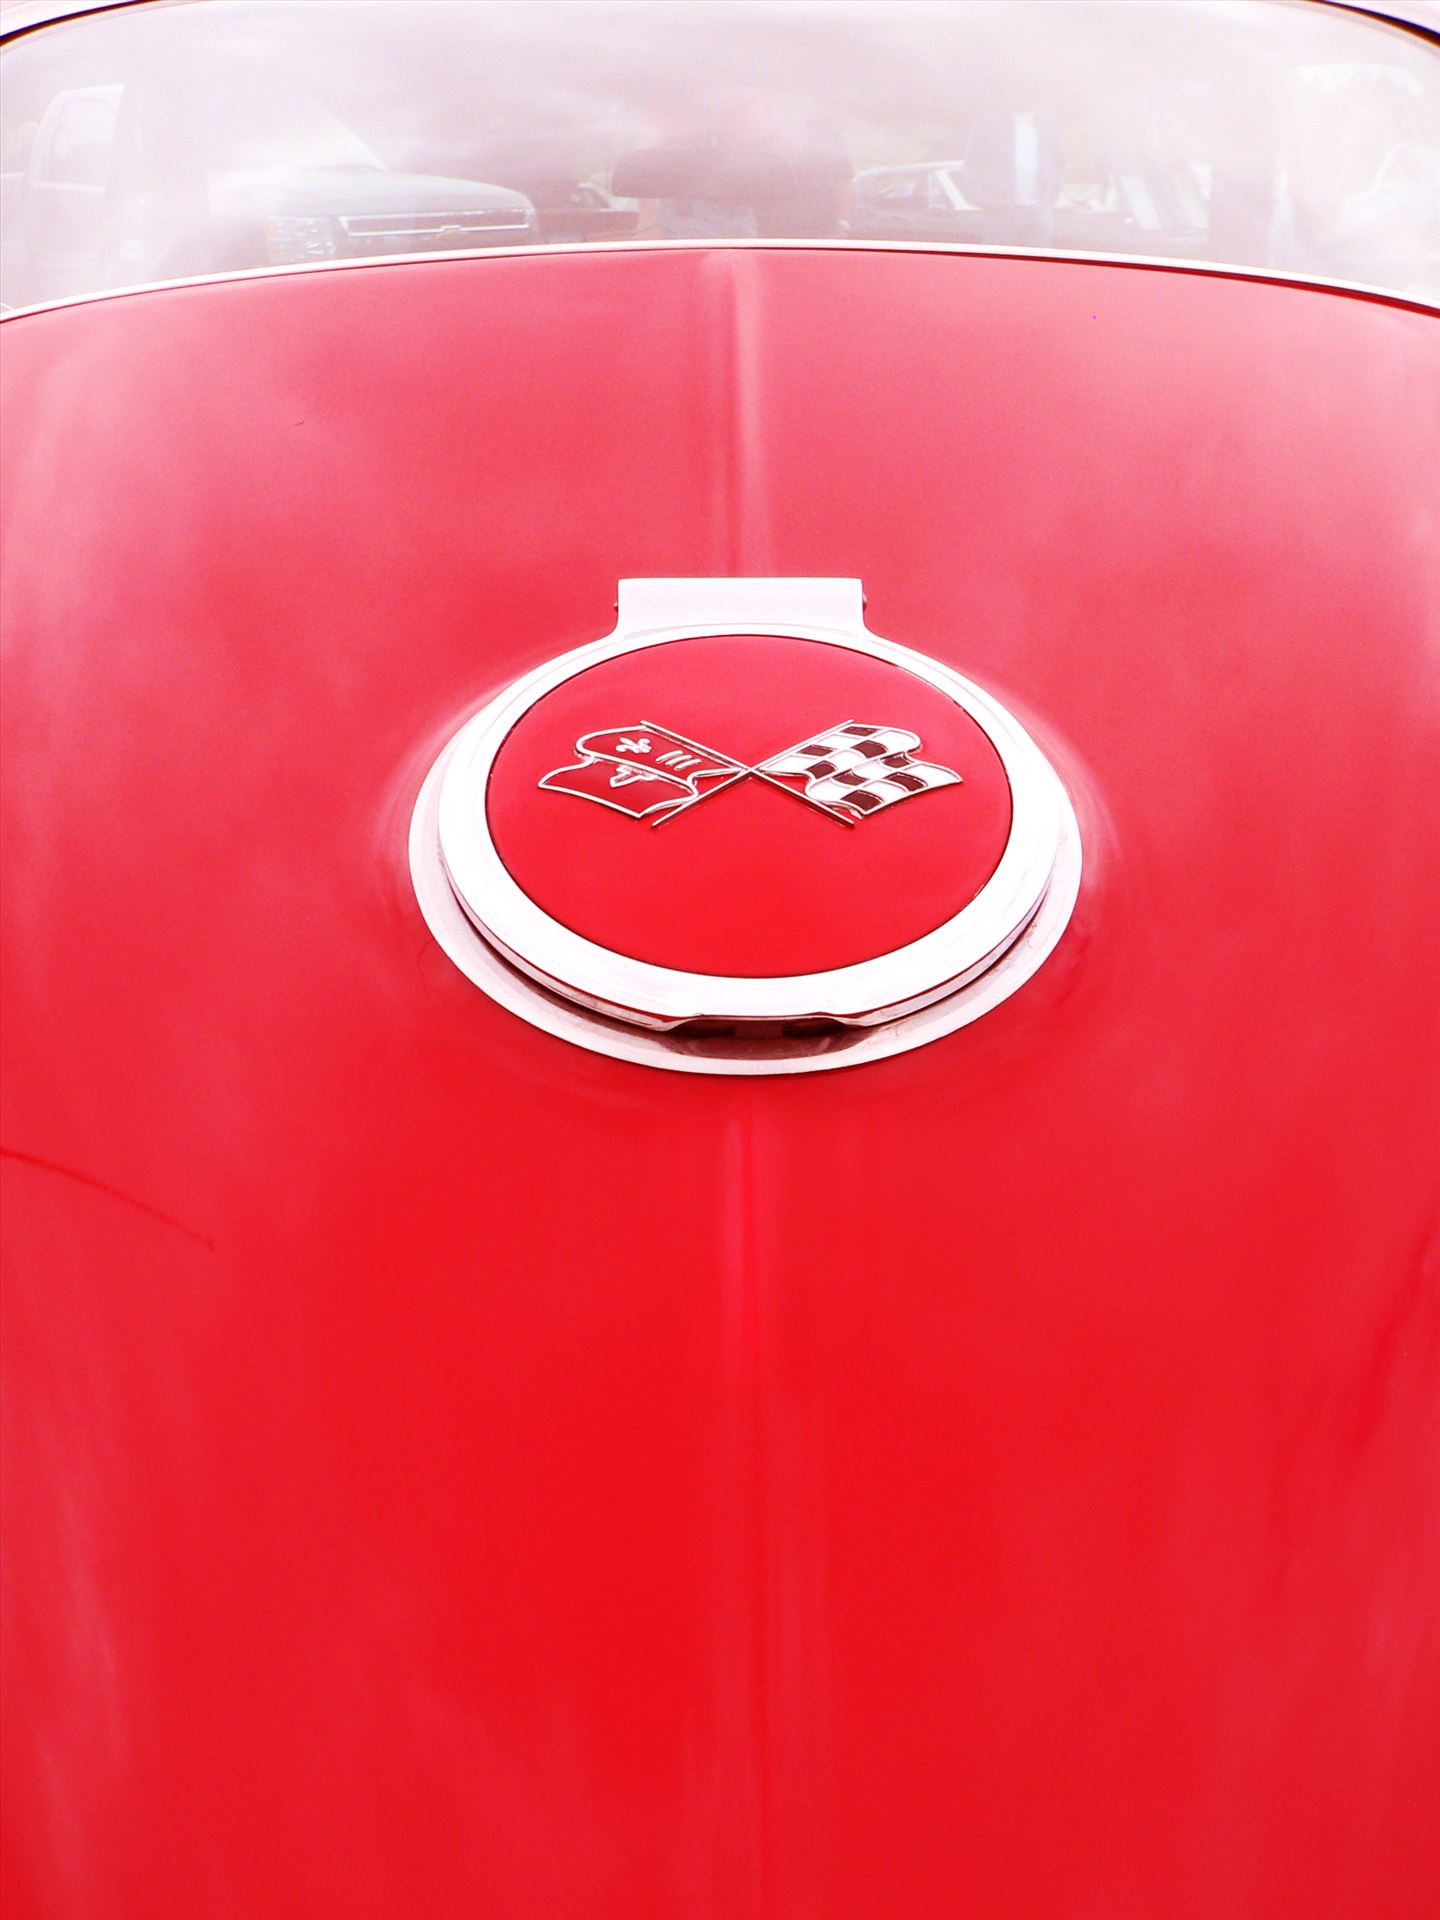 Vintage Fine Art Car Collection 07 1960's Corvette 327
These in Classic Red. Bam. by Studio 147